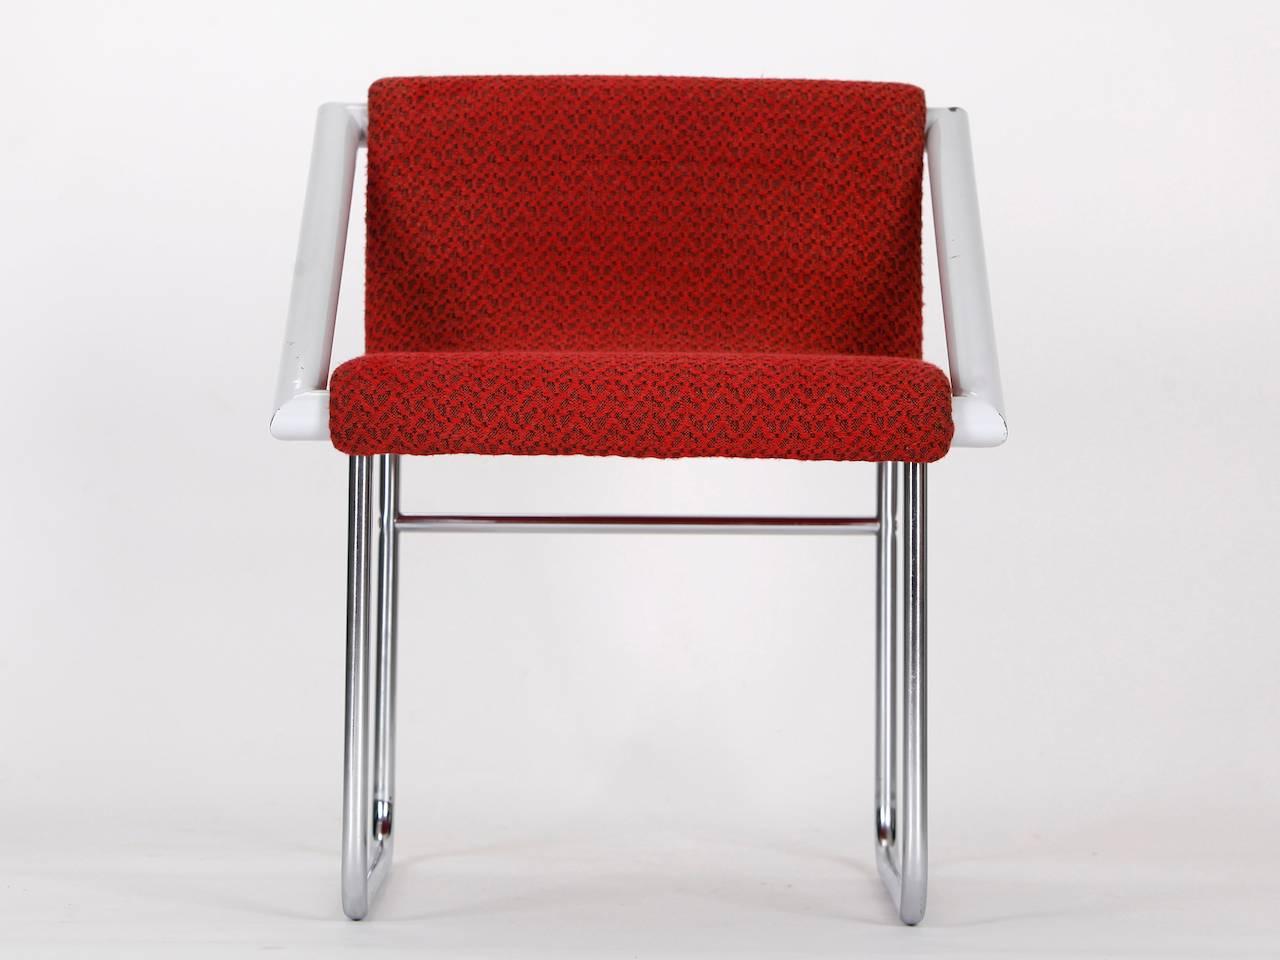 This armchair was manufactured during the 1960s in former Czechoslovakia. It features a chromed and lacquered tubular steel frame with the original fabric upholstery.